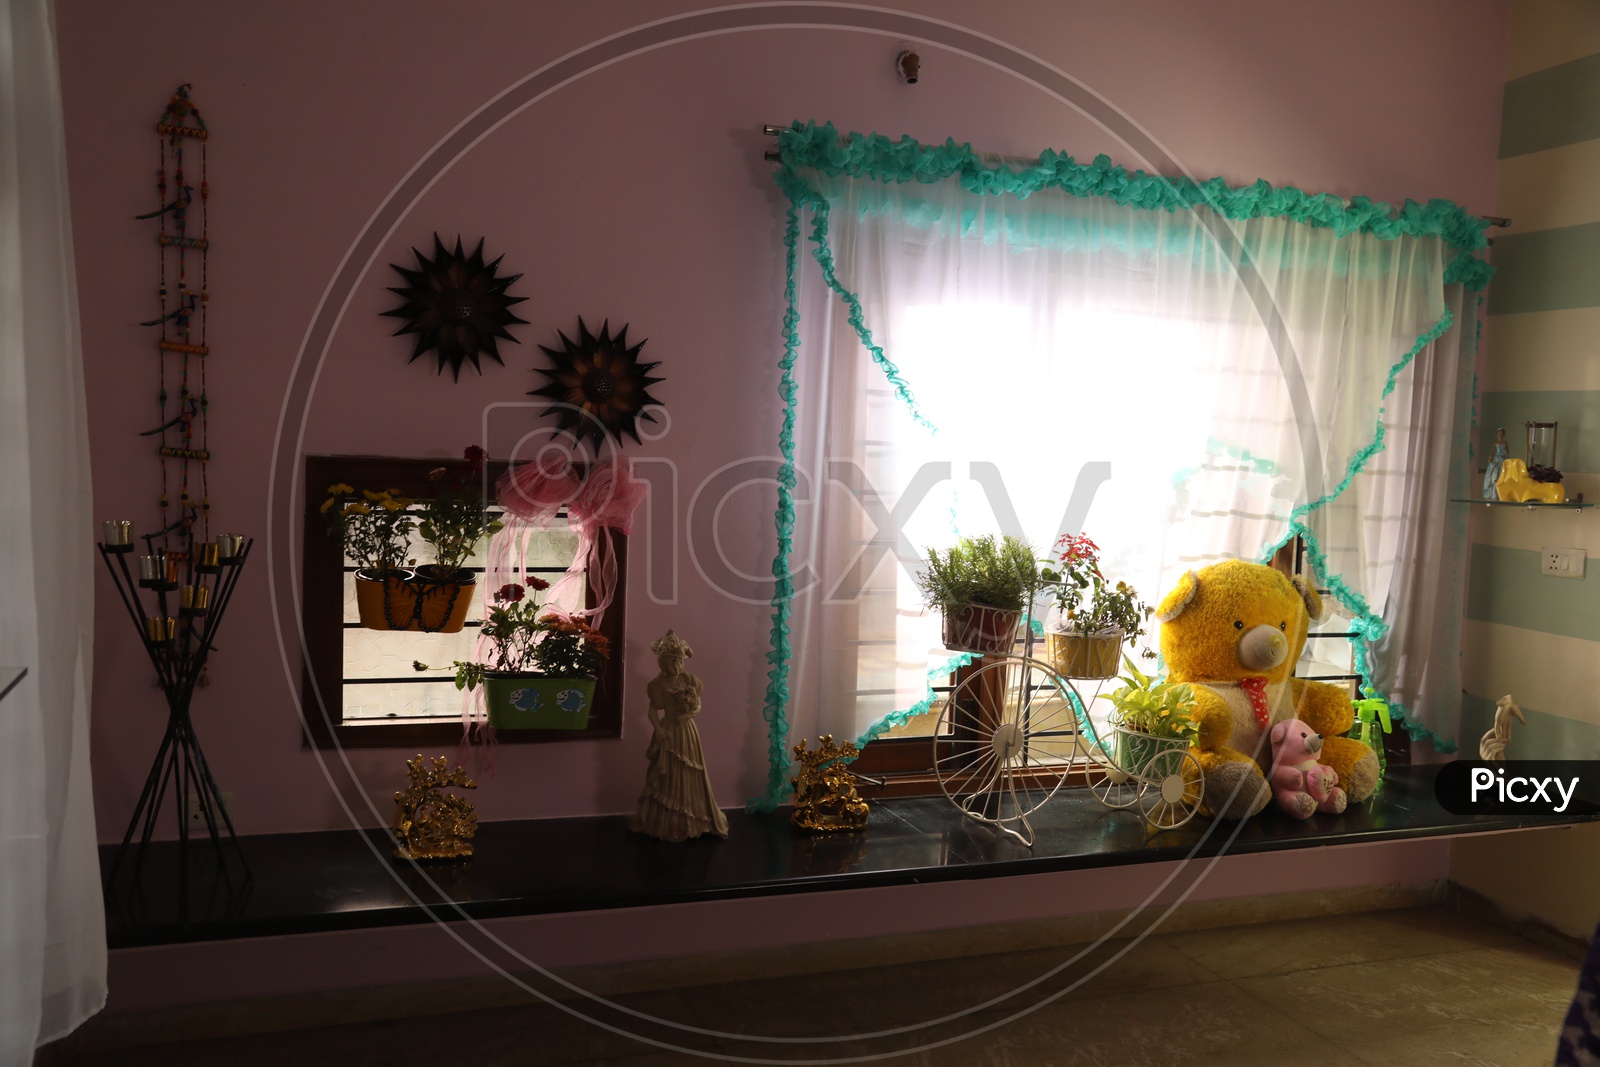 Teddy bears and other decorative items